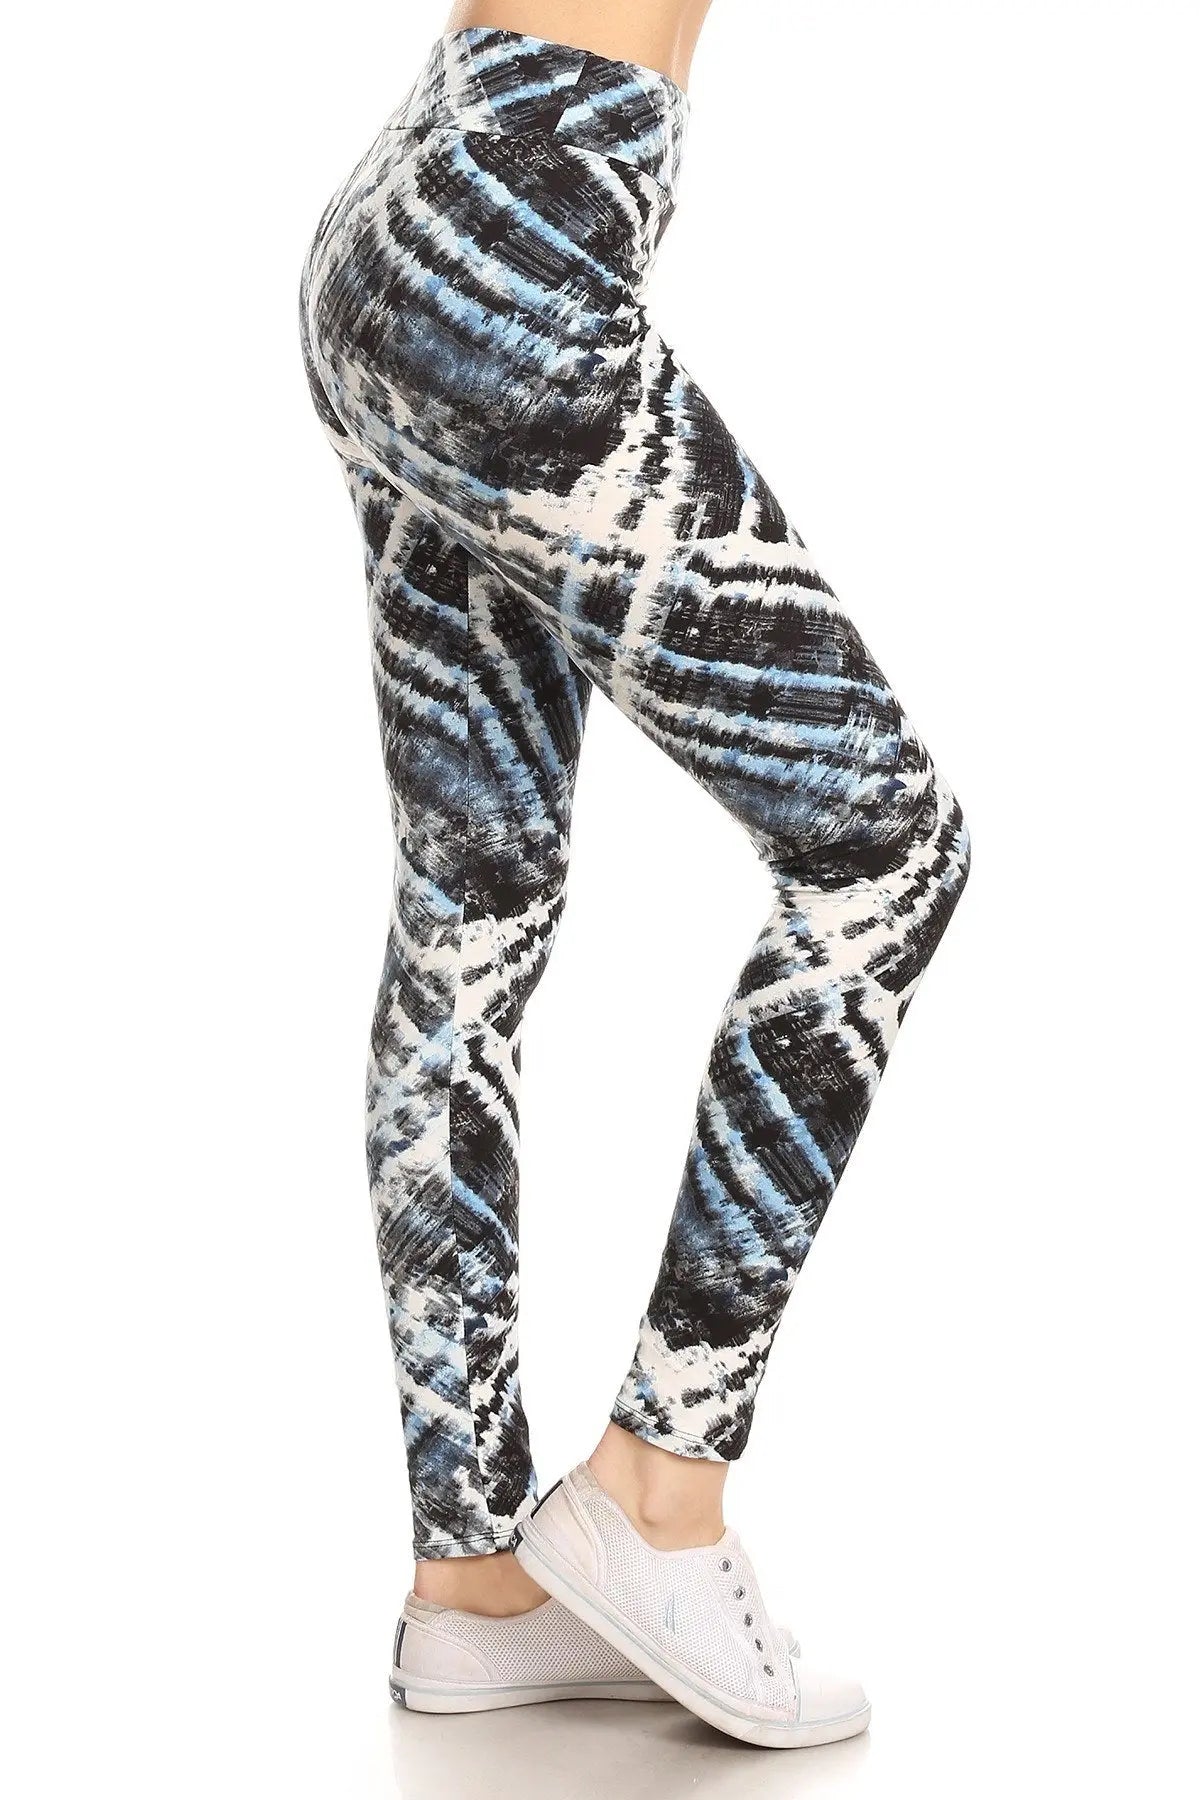 Yoga Style Banded Lined Tie Dye Printed Knit Legging With High Waist Sunny EvE Fashion